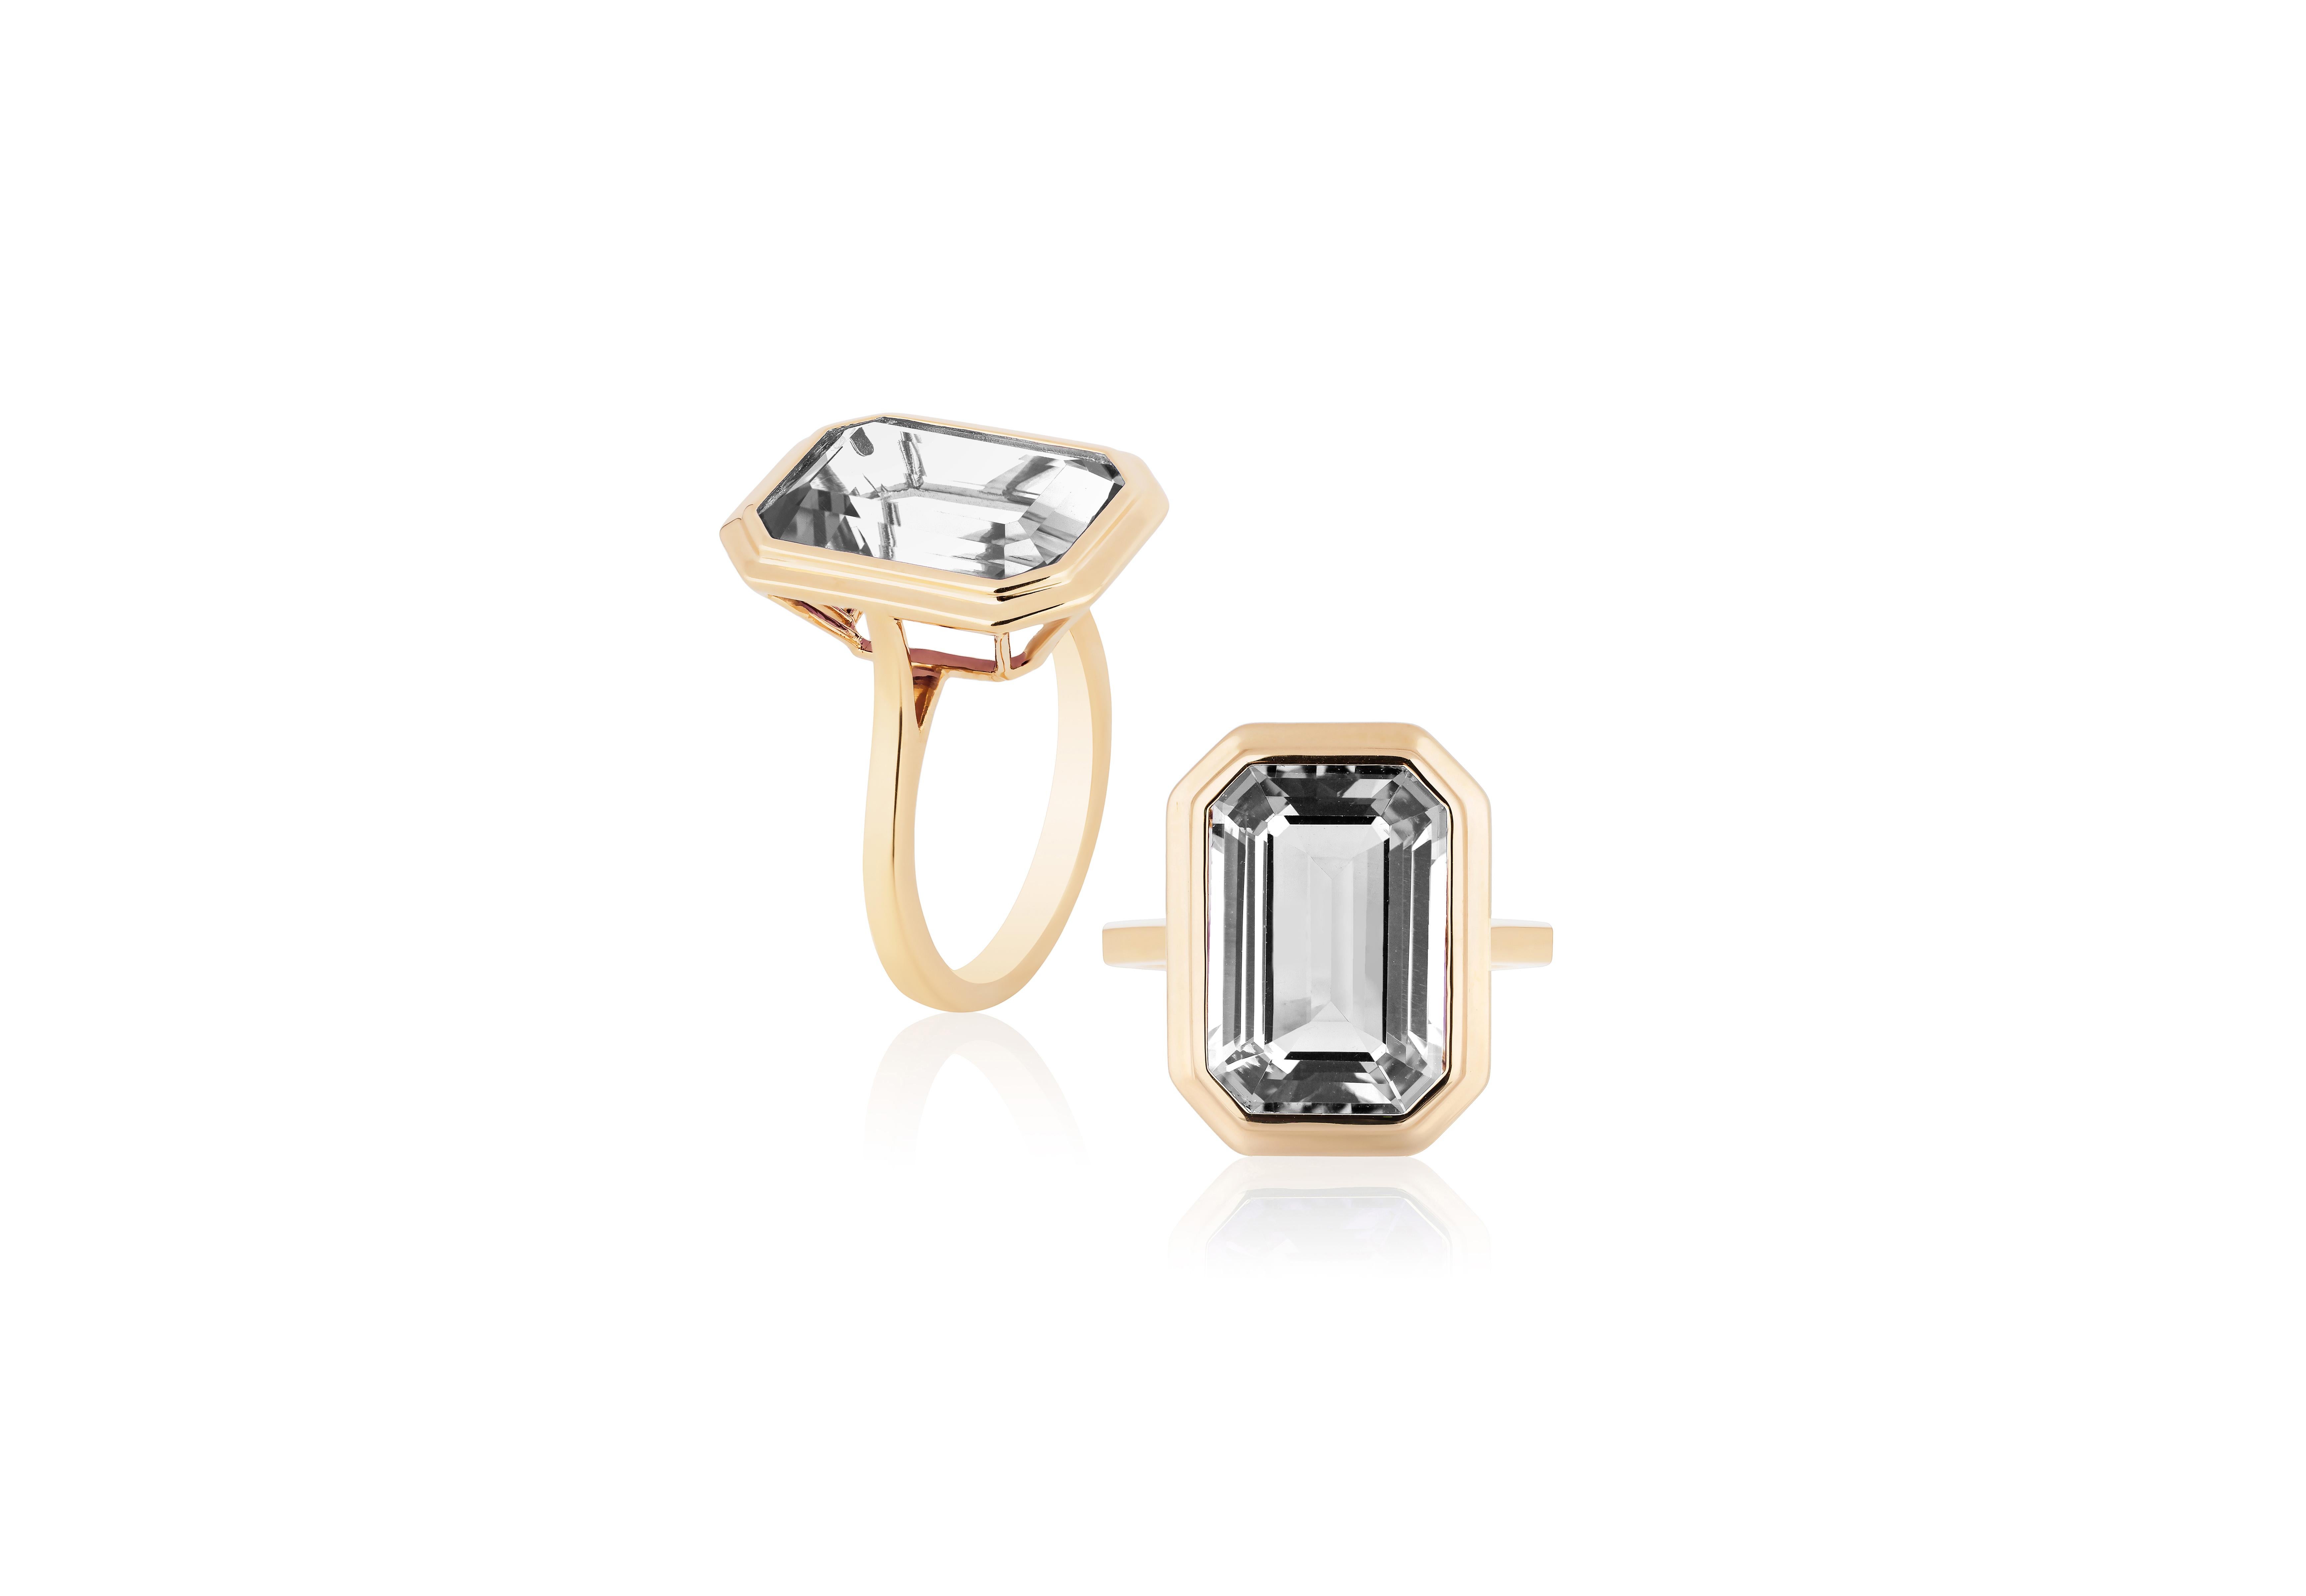 A classic yet an everyday bold statement piece, this amazing cocktail ring is part of our very new ‘Manhattan’ Collection. It has a 10 x 15 mm emerald cut Rock Crystal in a bezel setting in 18k gold   ​

Minimalist lines yet bold structures is what